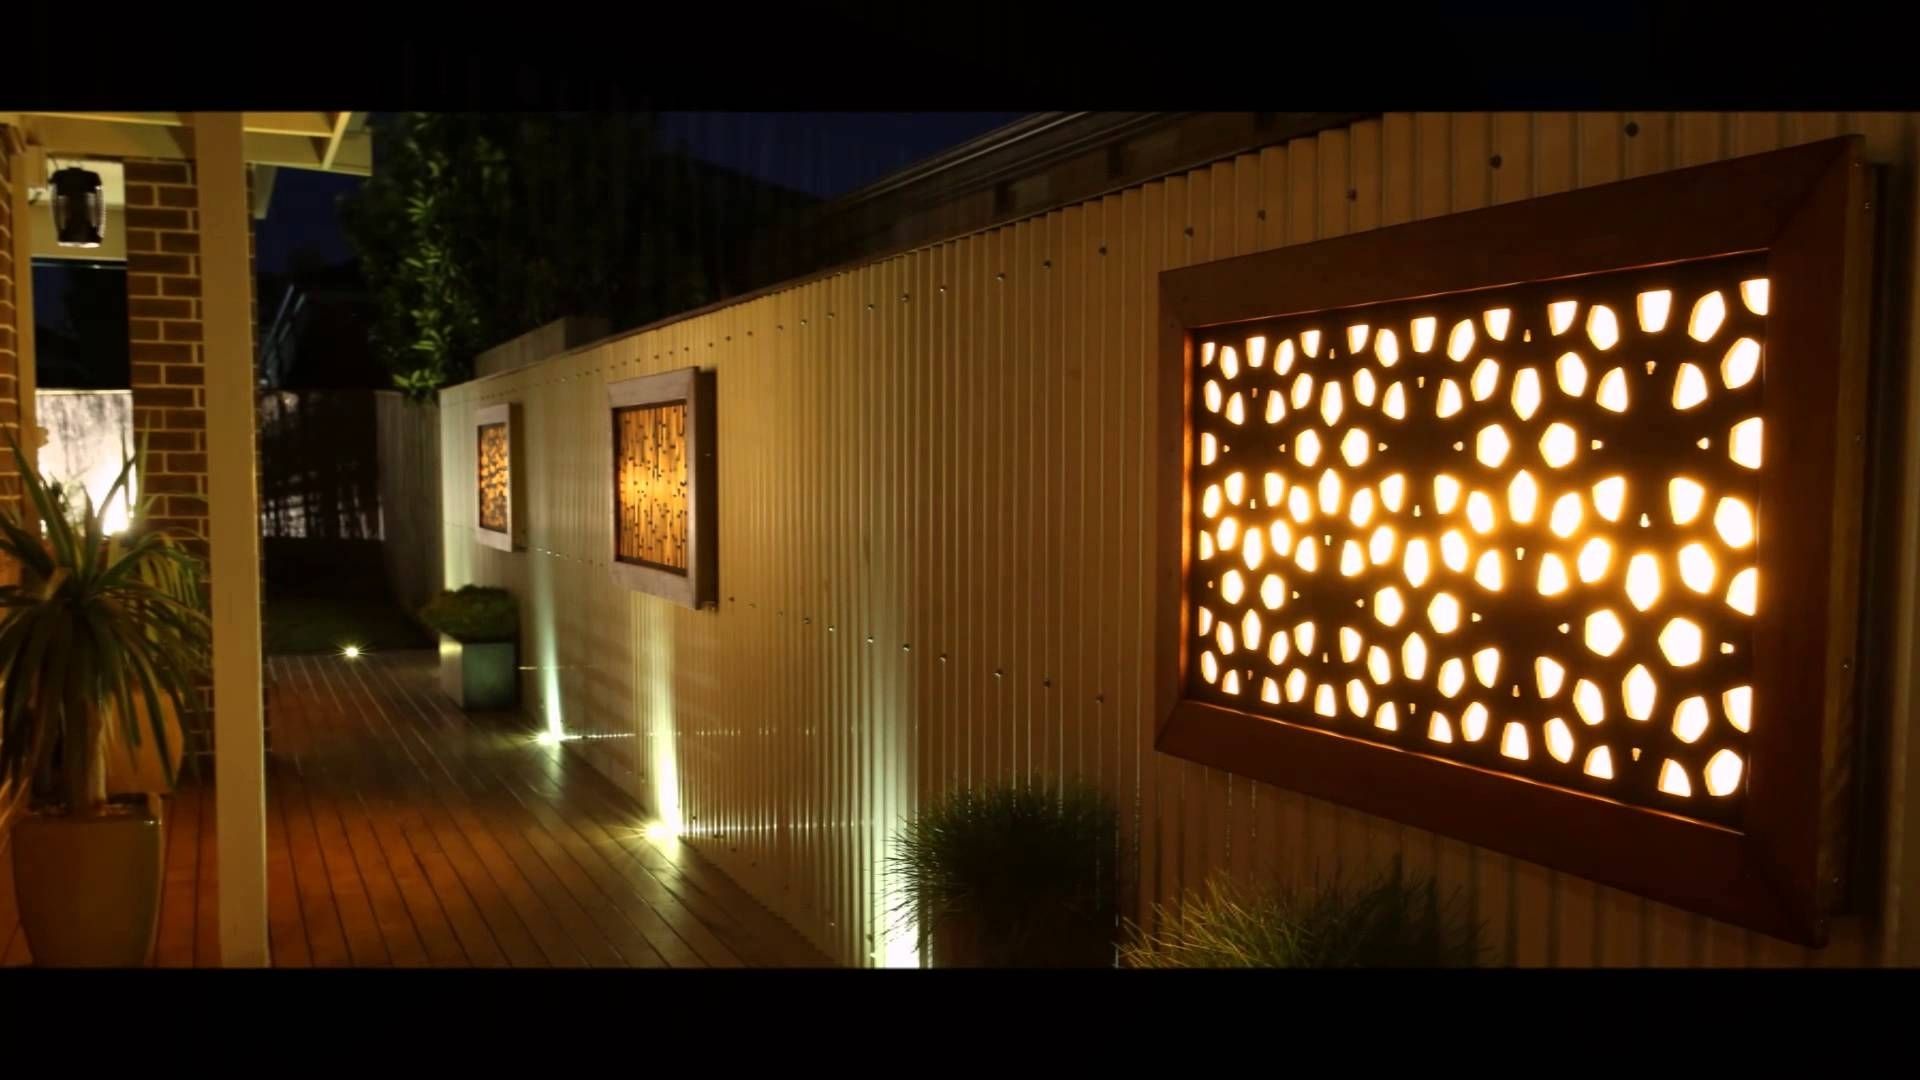 Article: Wall Art With Led Lights ›› Page 1